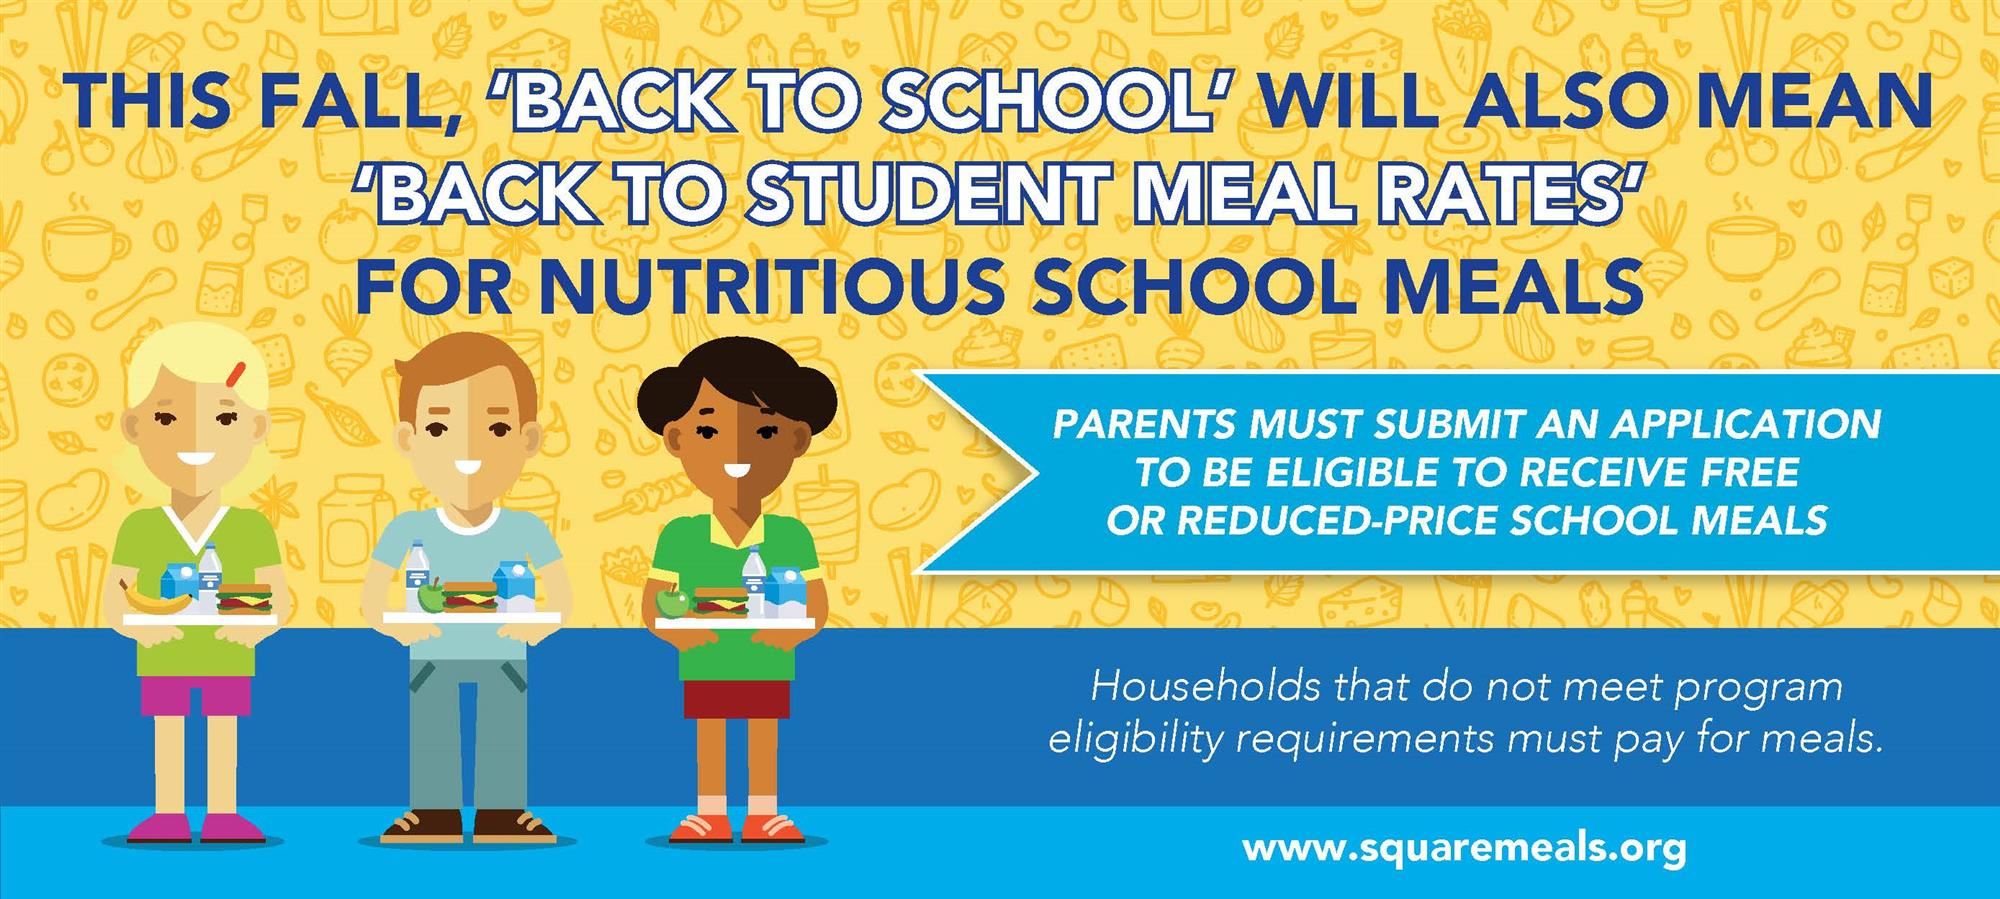 This Fall, Back To School Will Also Mean Back To Student Meal Rates For Nutritious School Meals